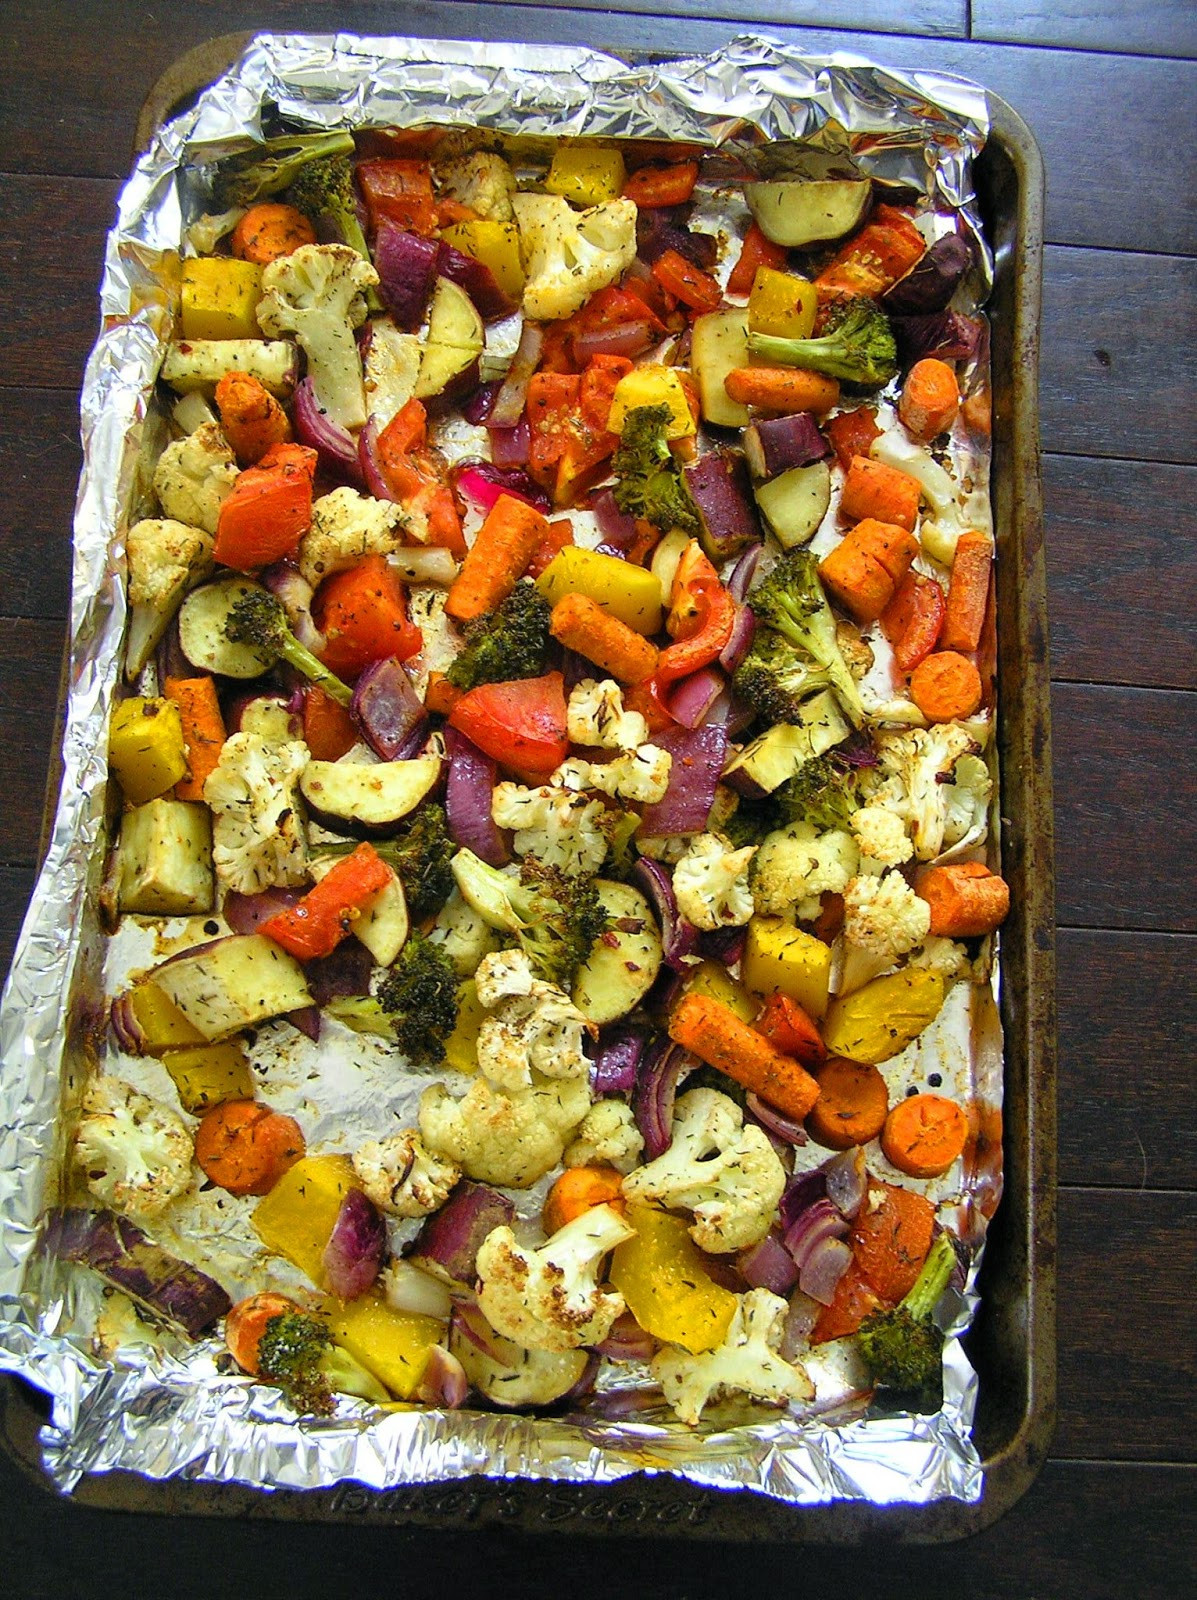 Roasted Vegetables In The Oven
 The Melting Pot Oven Roasted Ve ables